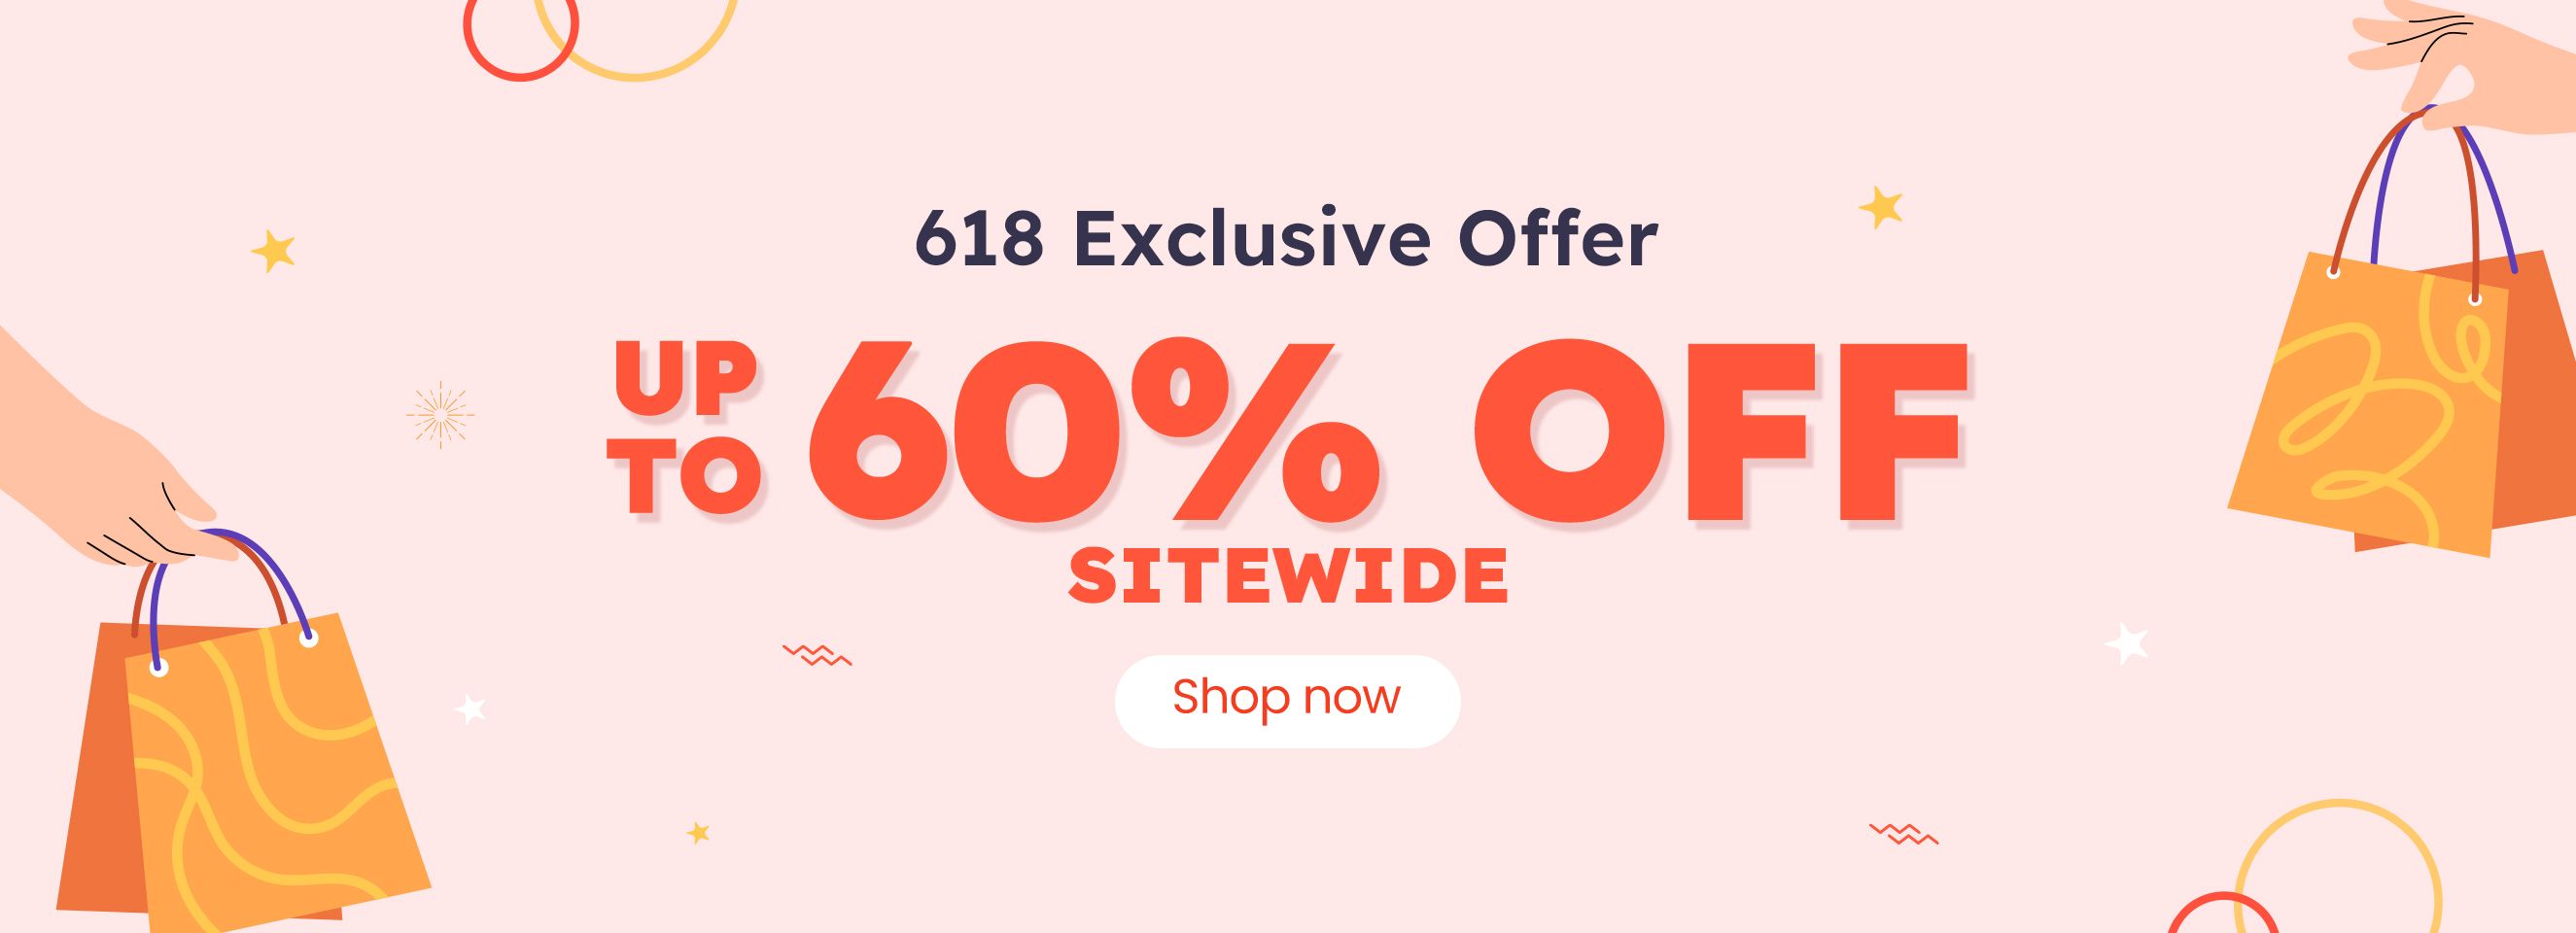 Click it to join 618 Exclusive Offer activity